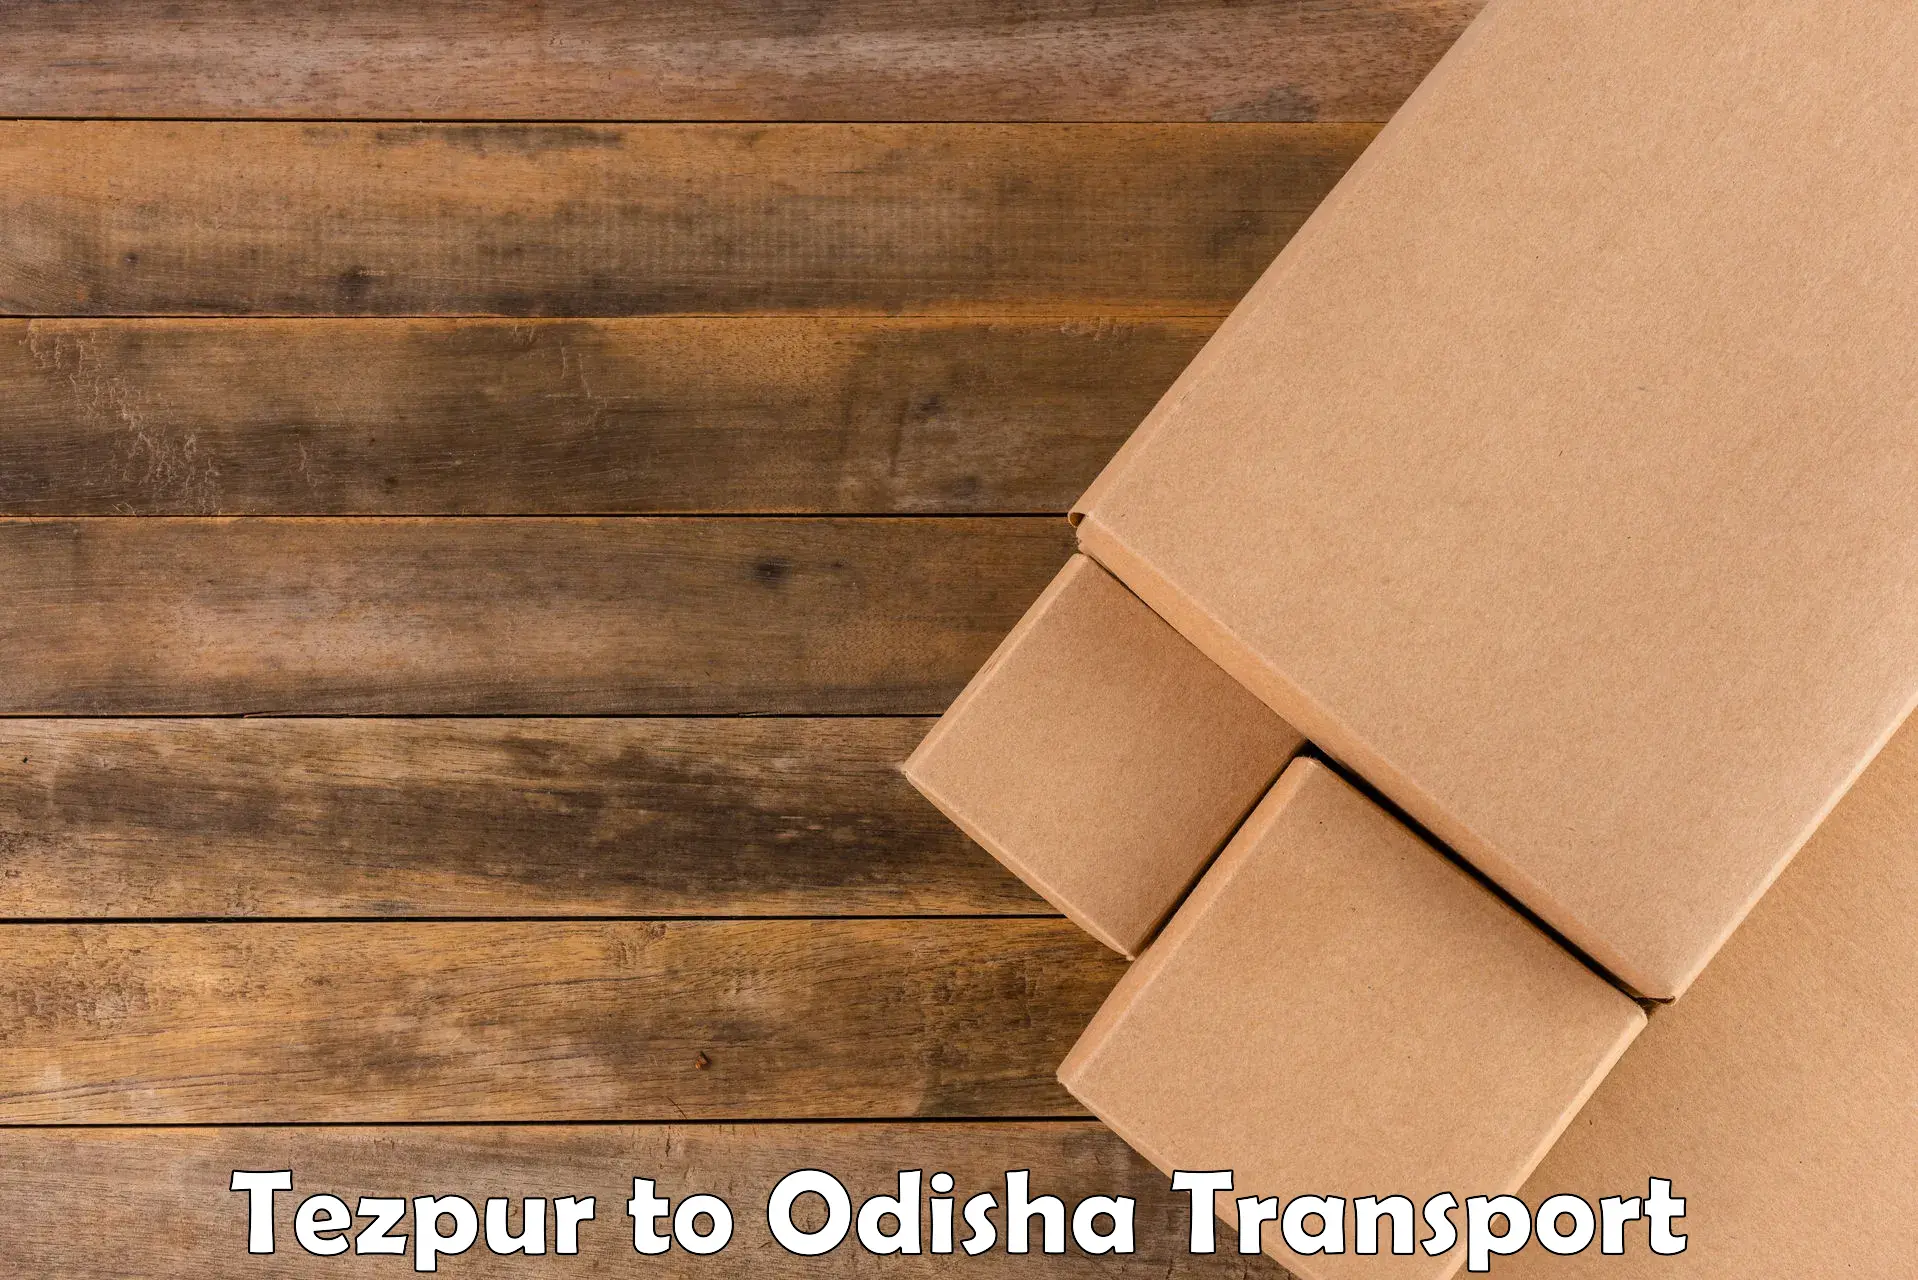 Transport bike from one state to another Tezpur to Gajapati